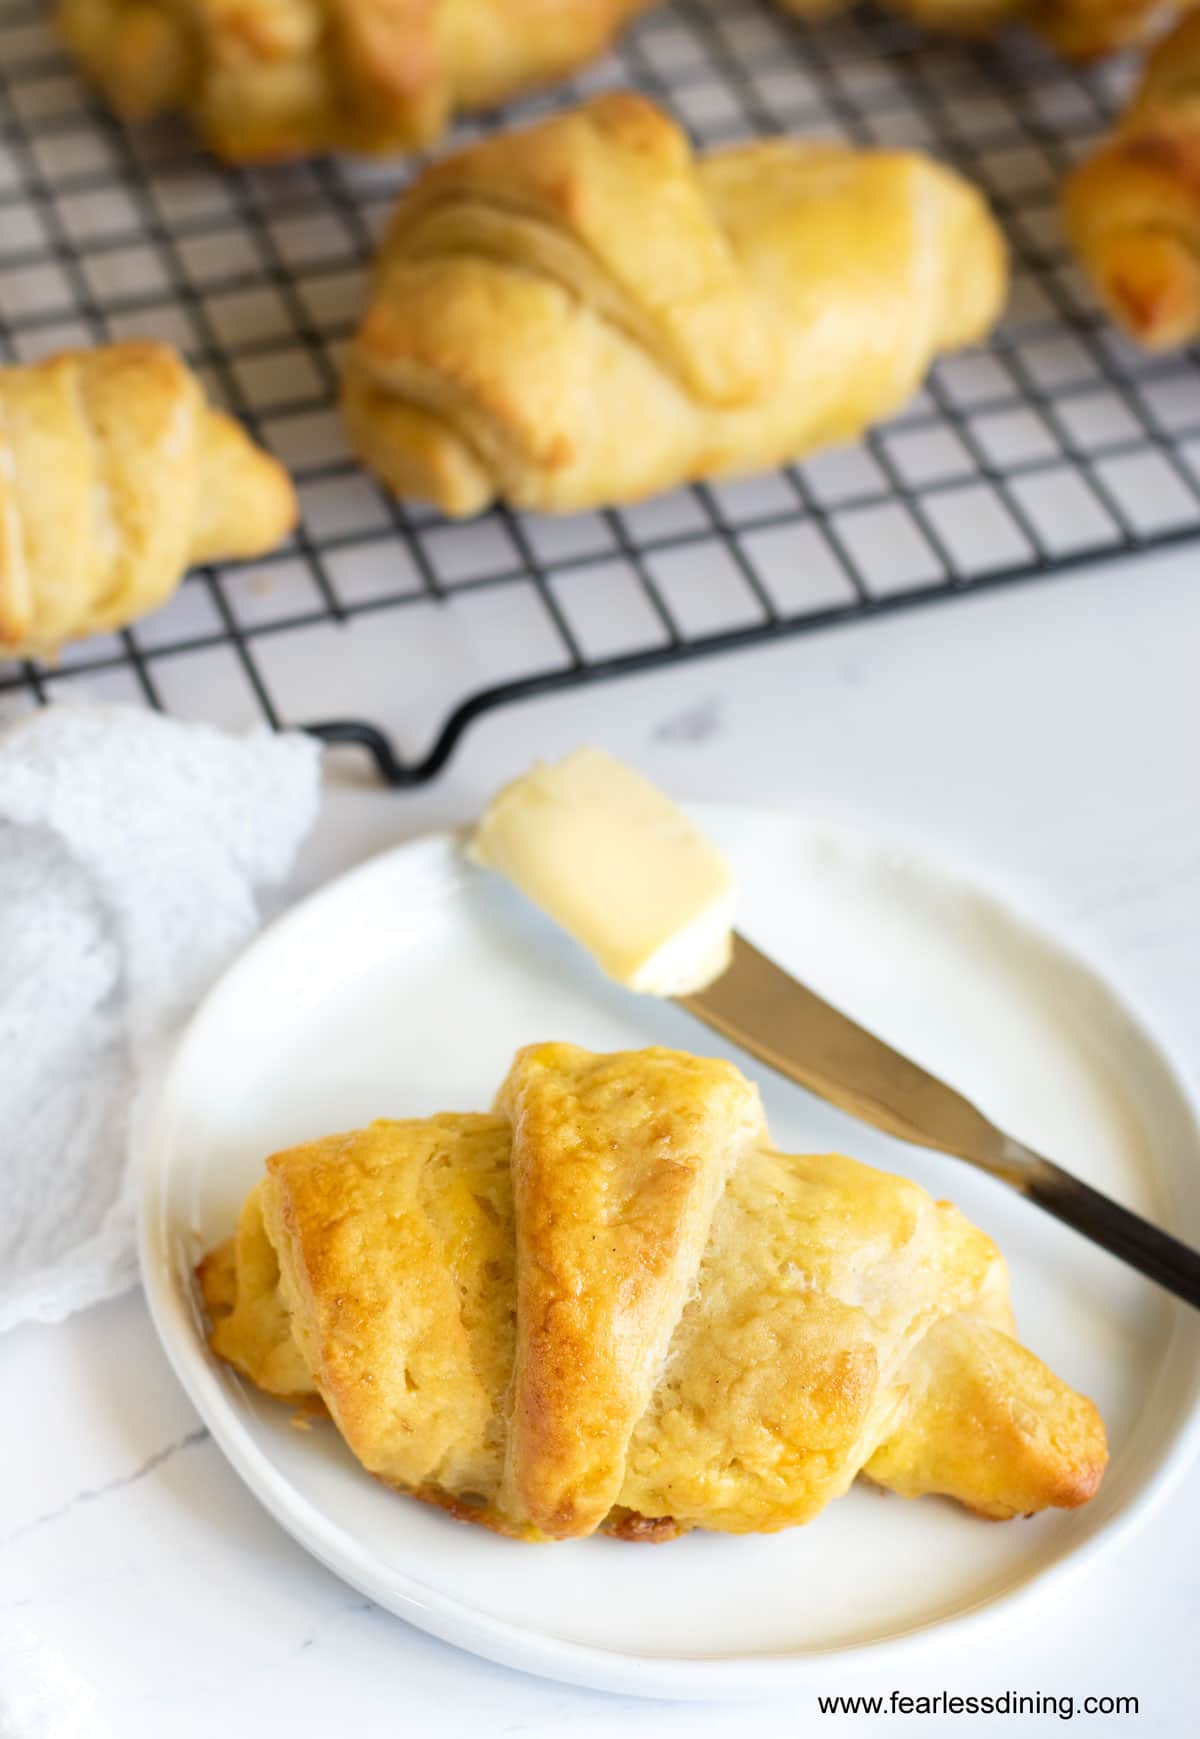 A gluten free crescent roll on a white plate next to a rack of crescent rolls.